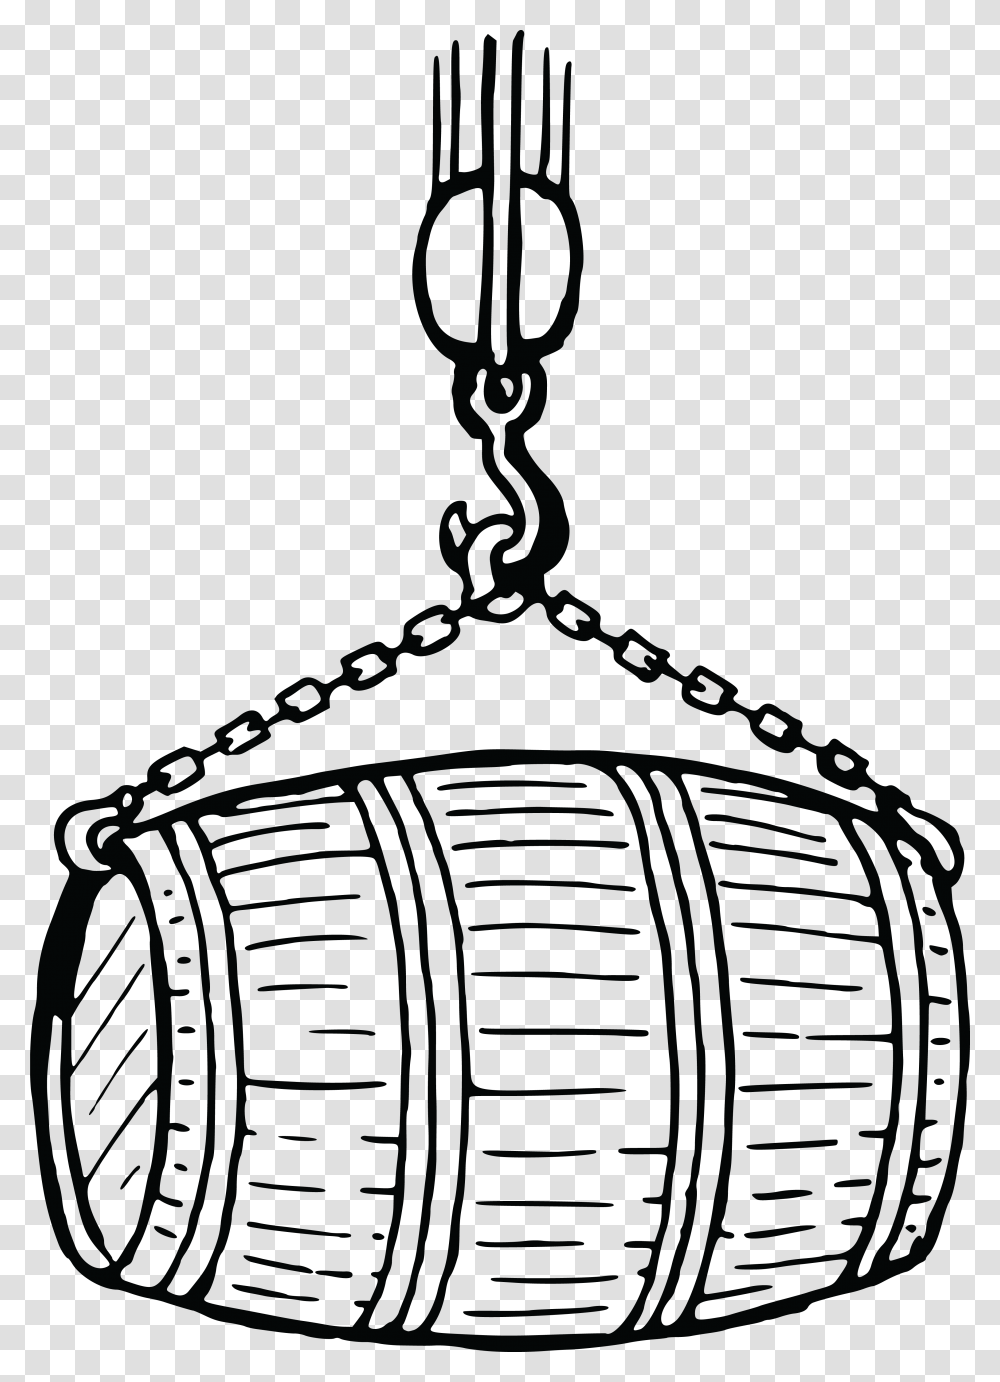 Free Clipart Of A Wooden Barrel In A Sling Black And White, Tool, Coil, Spiral Transparent Png